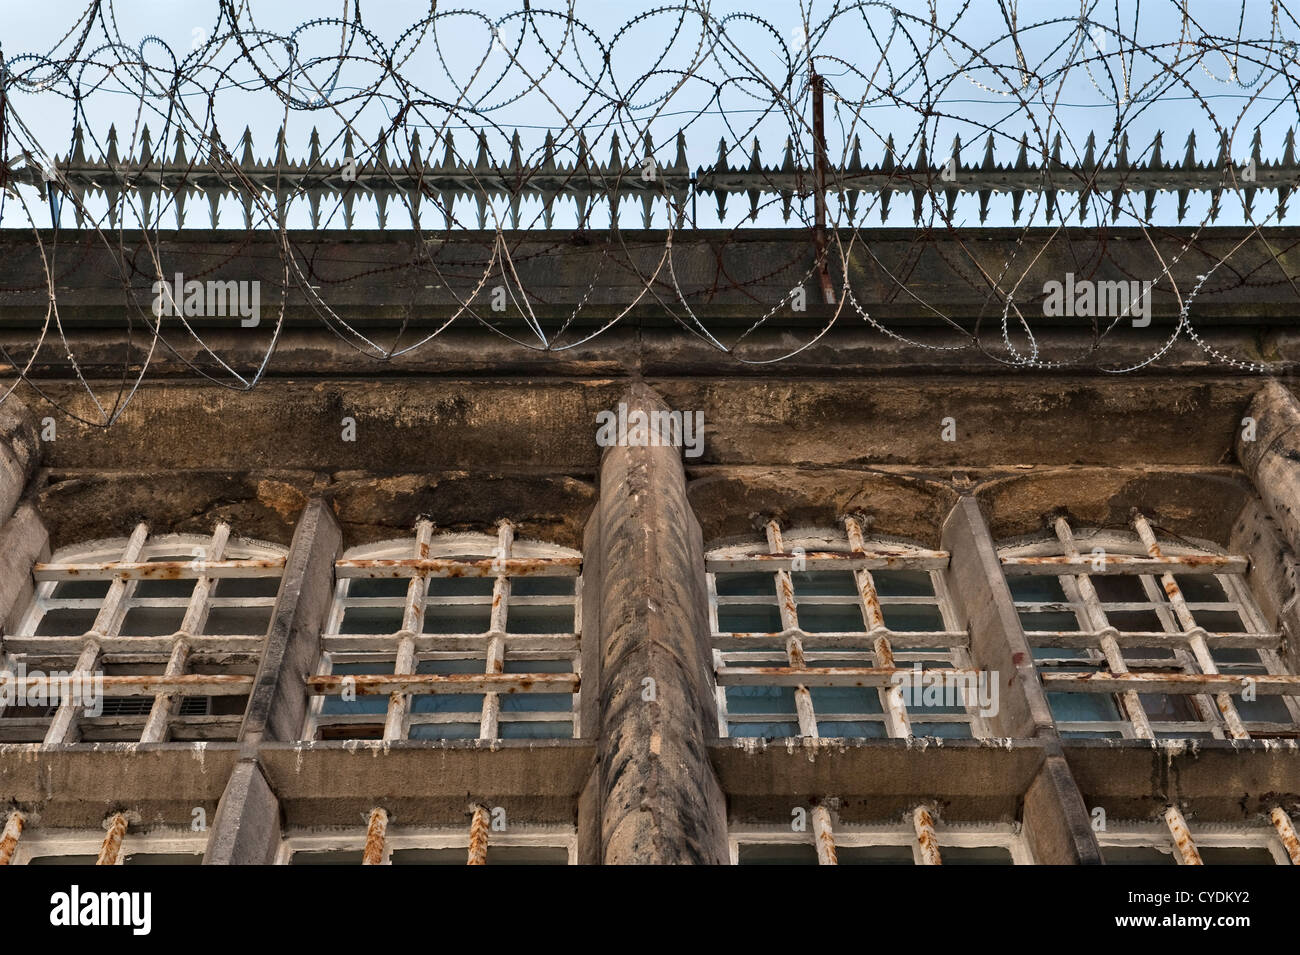 Bars and razor wire prevent access to the roof of a recently abandoned prison in the UK Stock Photo